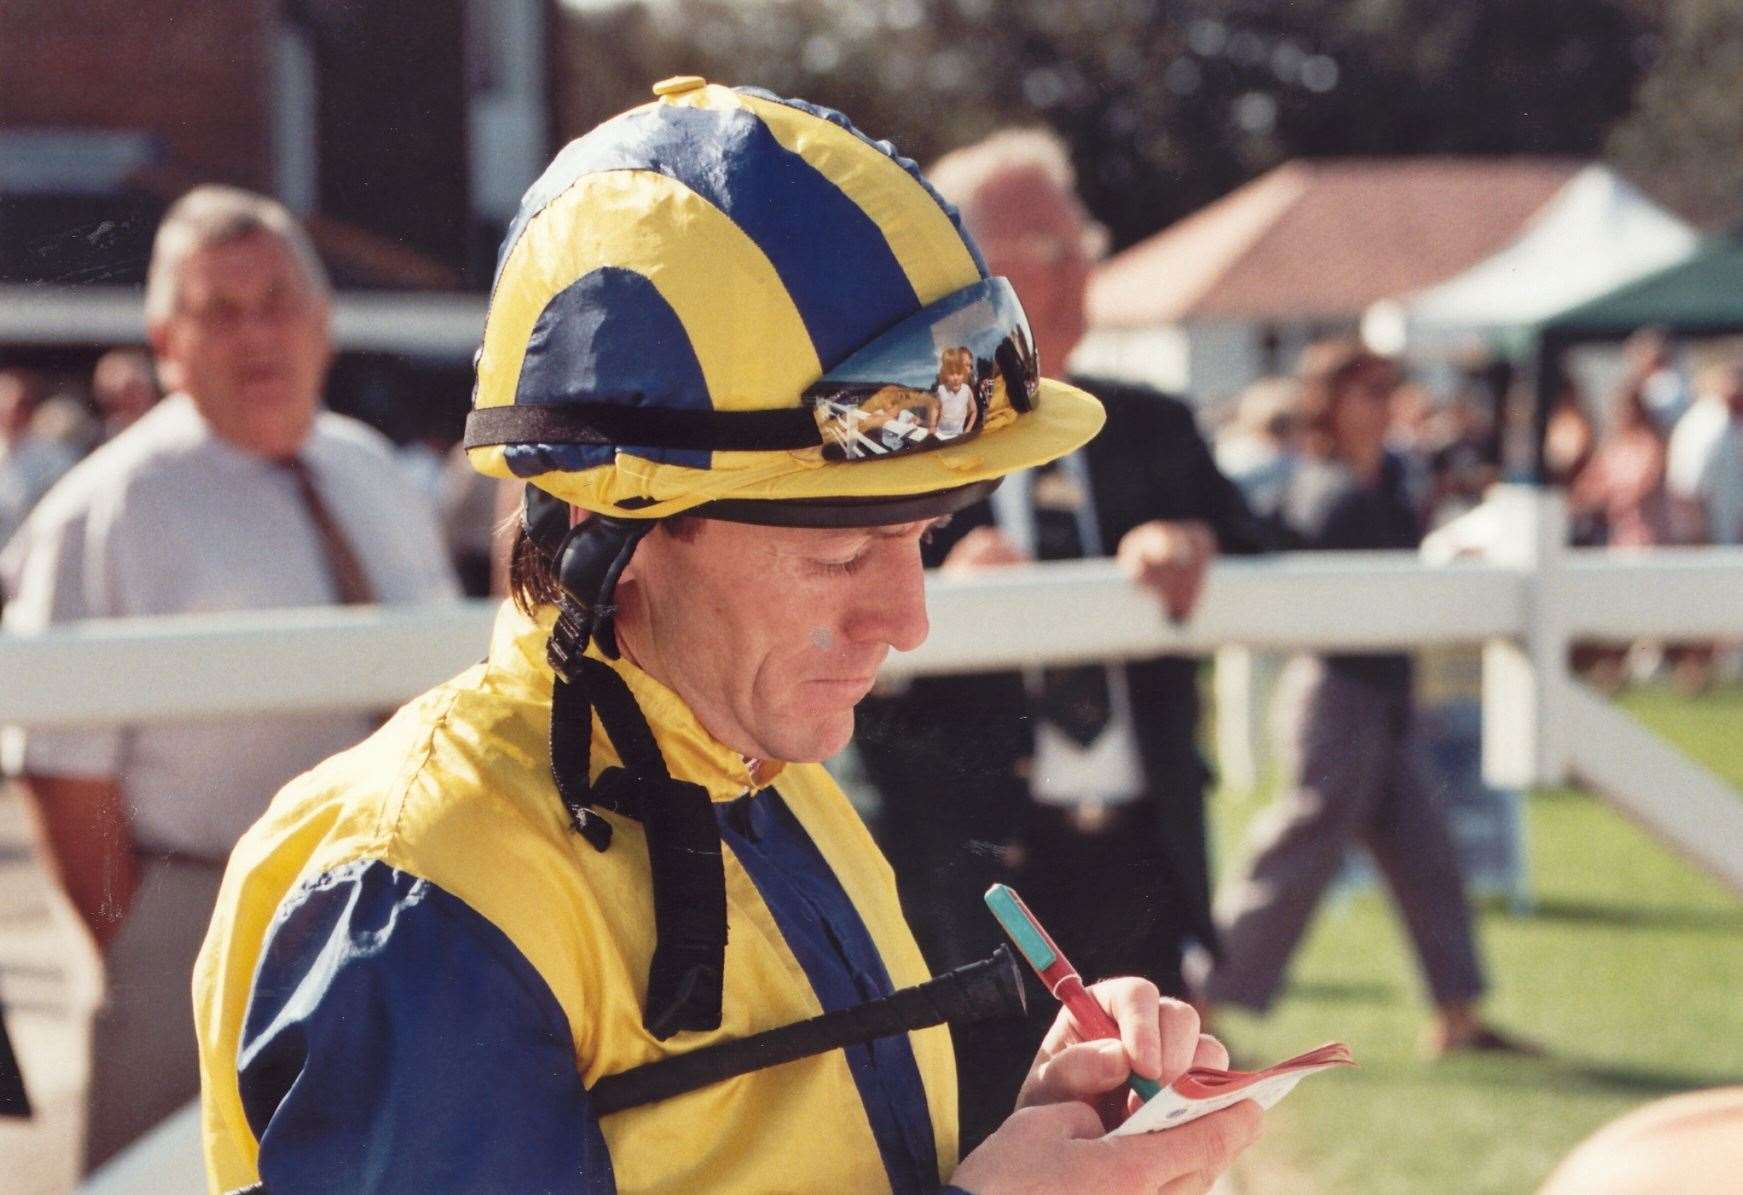 Champion jockey Kieren Fallon signs autographs during the first-ever Sunday meeting at Folkestone Racecourse in August 2004